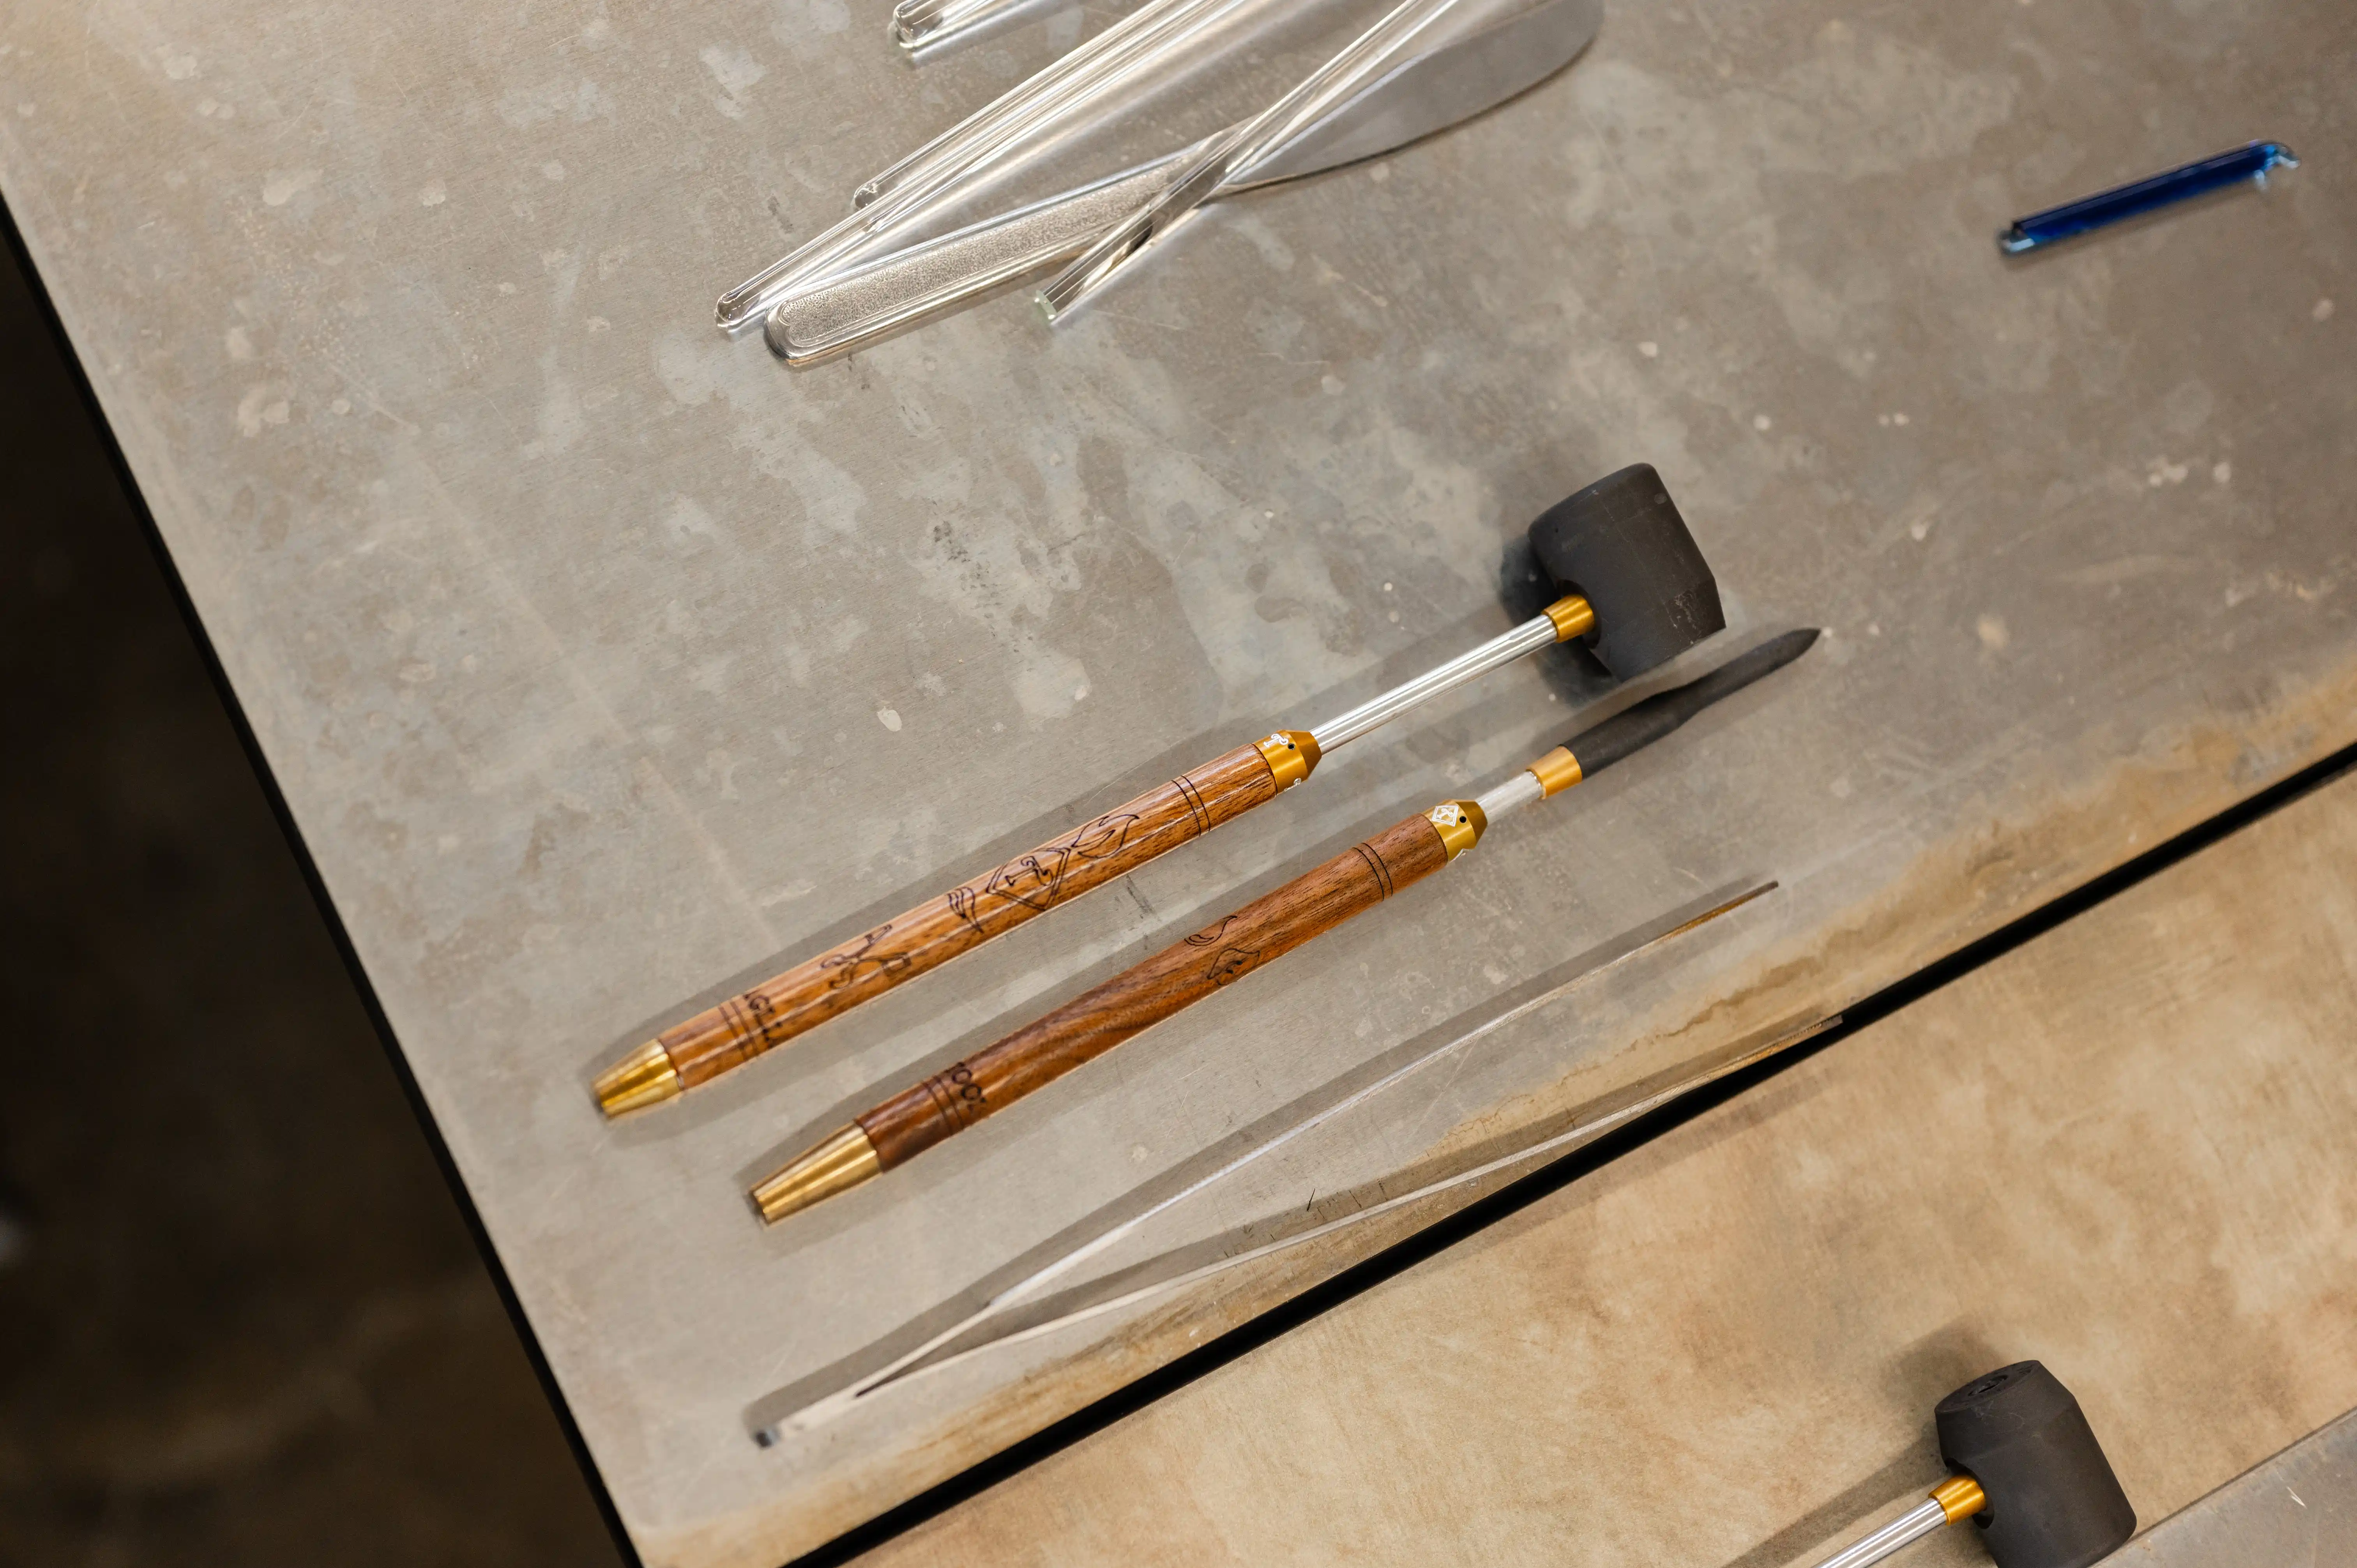 Craftsman workbench with an assortment of tools including chisels with wooden handles, a rubber mallet, and a blue plastic pen.